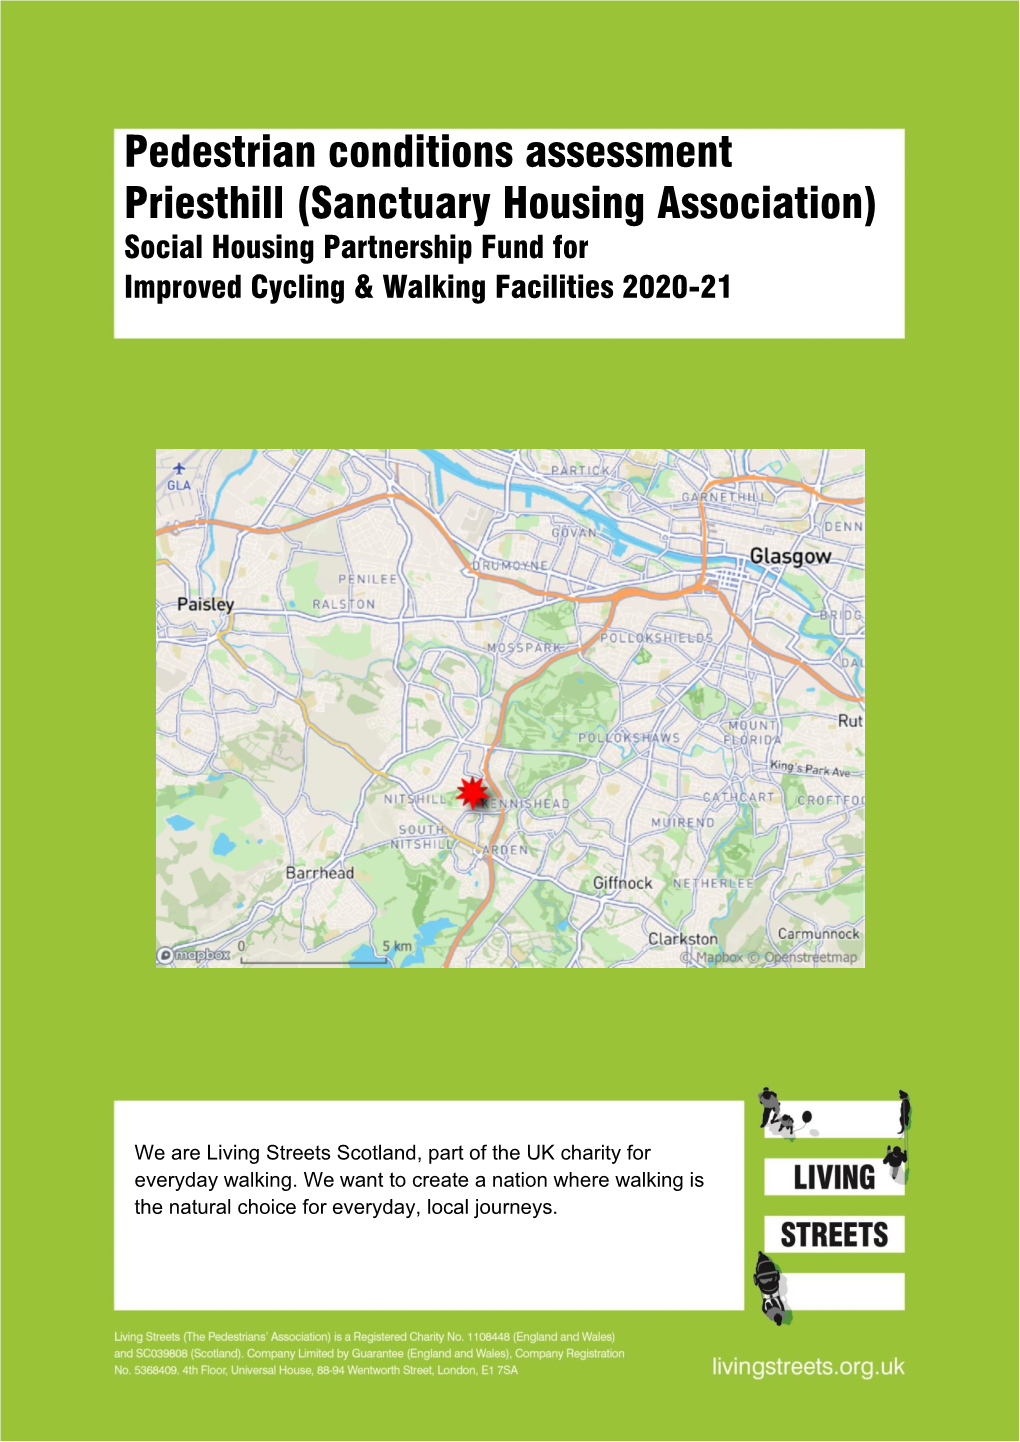 Pedestrian Conditions Assessment Priesthill (Sanctuary Housing Association) Social Housing Partnership Fund for Improved Cycling & Walking Facilities 2020-21